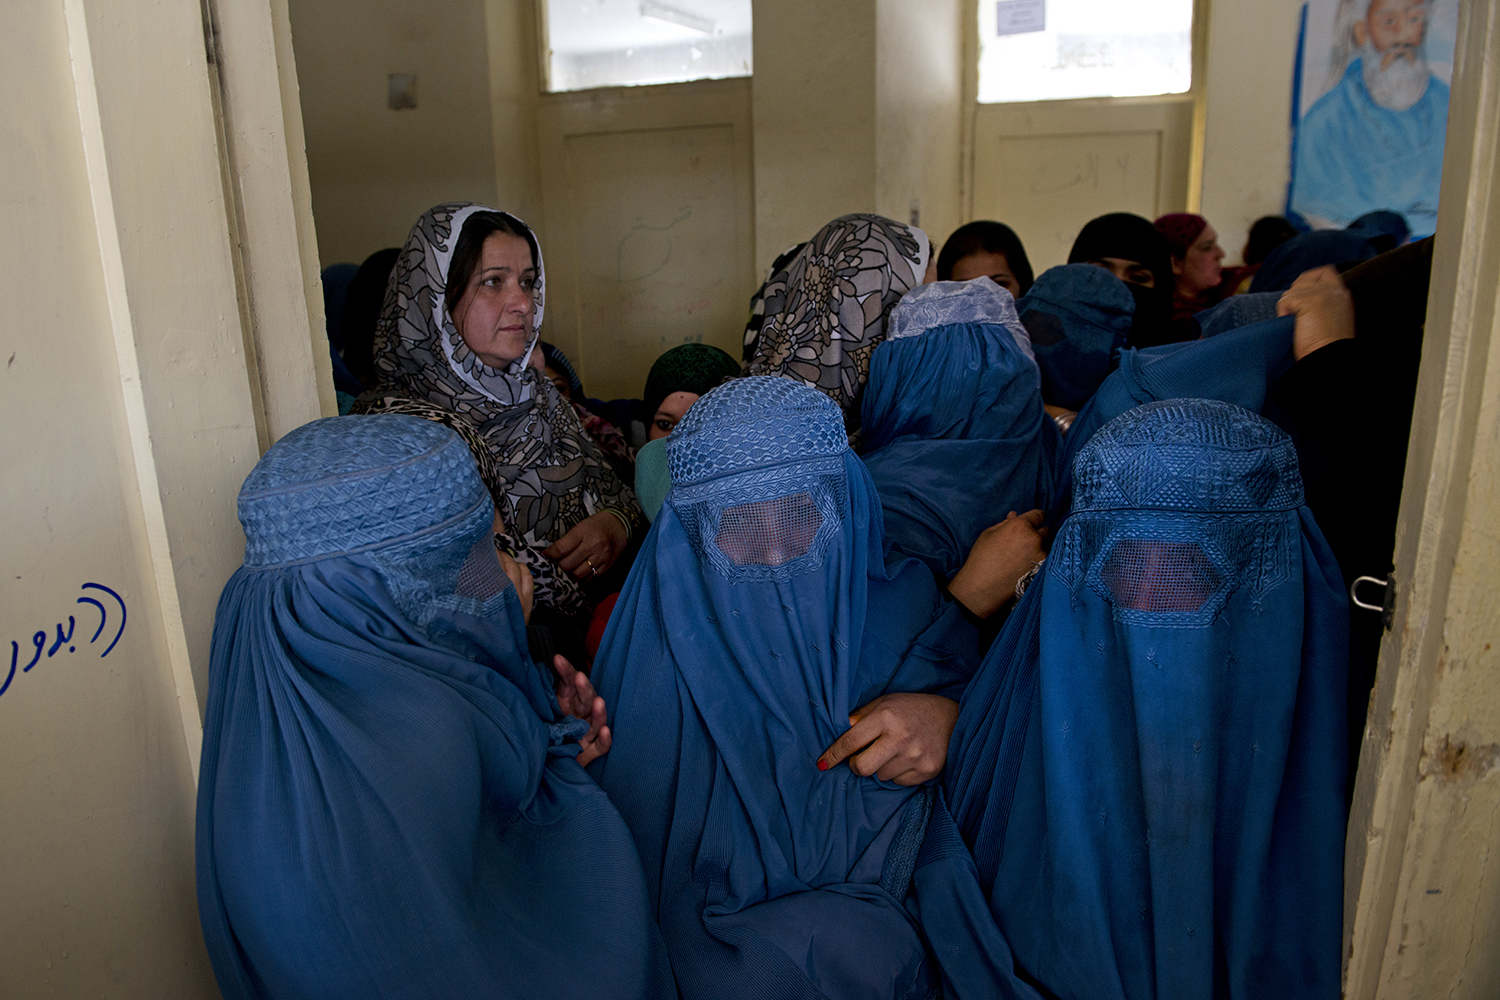 Afghans line up to register to vote for Presidential elections at a center run by the Afghan Independent Electoral Commission in Shah Shaheed, Kabul, Afghanistan, March 25, 2014.  There has been a surge in Taliban attacks aimed at derailing elections leading up to voting day in Afghanistan, and the future stability of the country is unclear. (Credit: Lynsey Addario for Time Magazine)